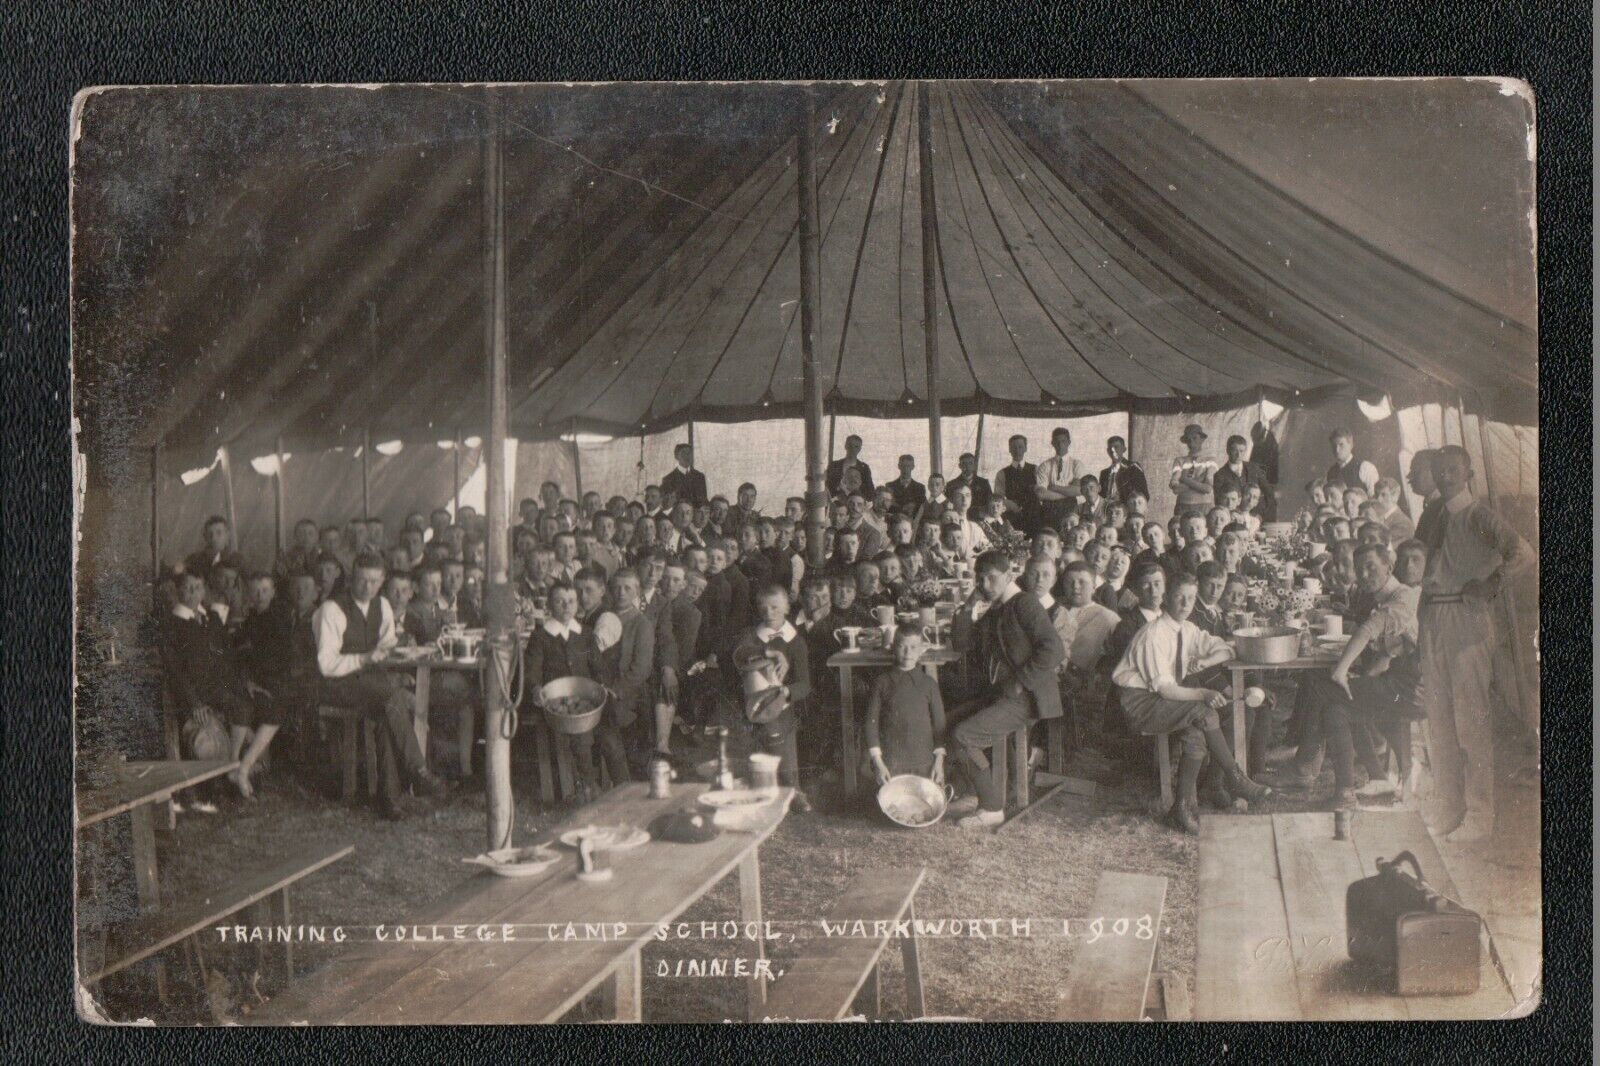 House Clearance - Training College Camp School Dinner Warkworth 1908 Service ~ LOVELY IMAGE